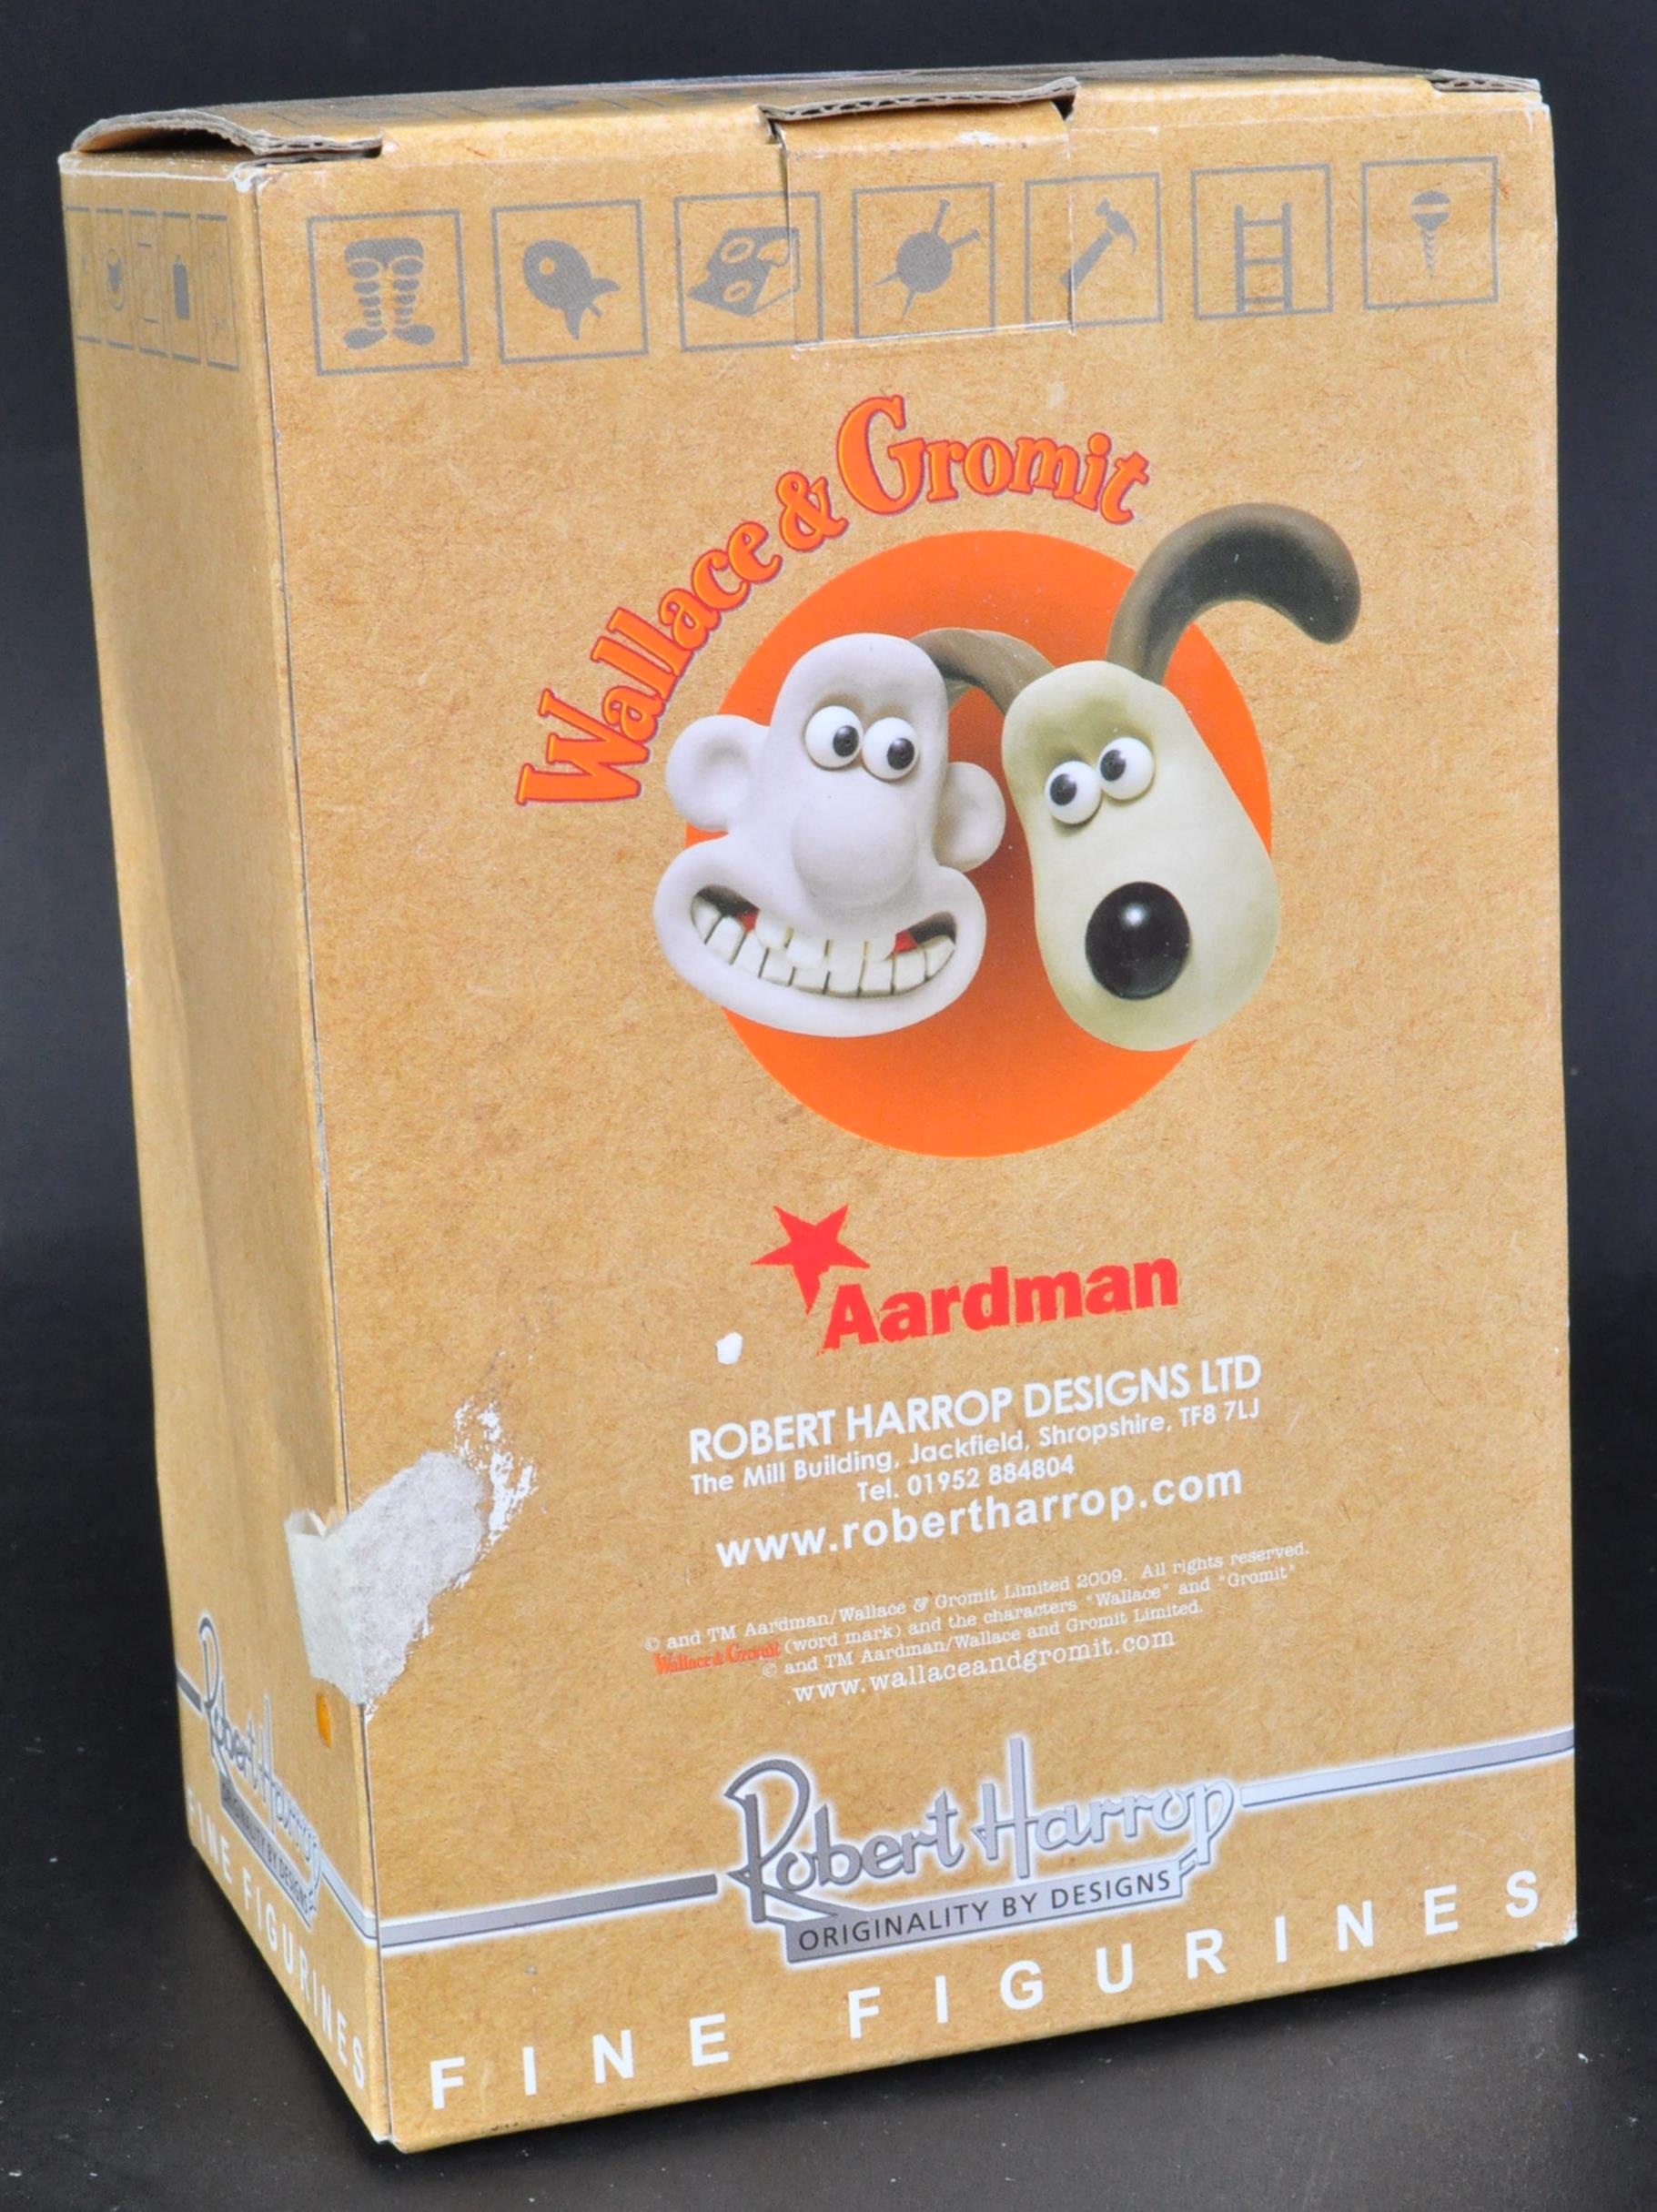 WALLACE & GROMIT - ROBERT HARROP - LIMITED EDITION FIGURINE - Image 5 of 5